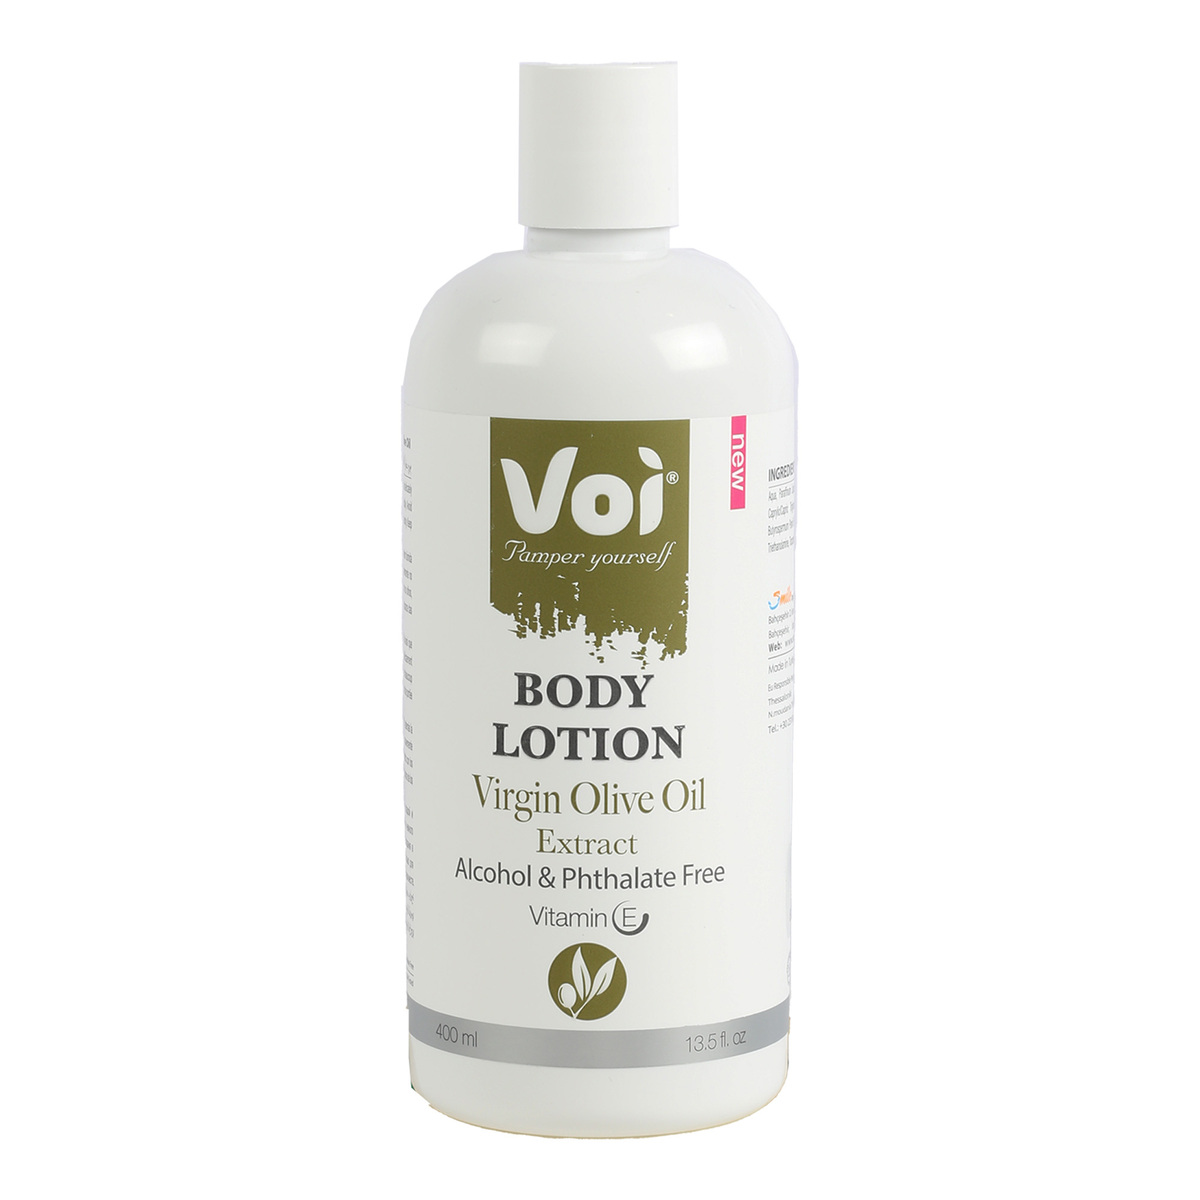 Voi Virgin Olive Oil Extract Body Lotion 400 ml